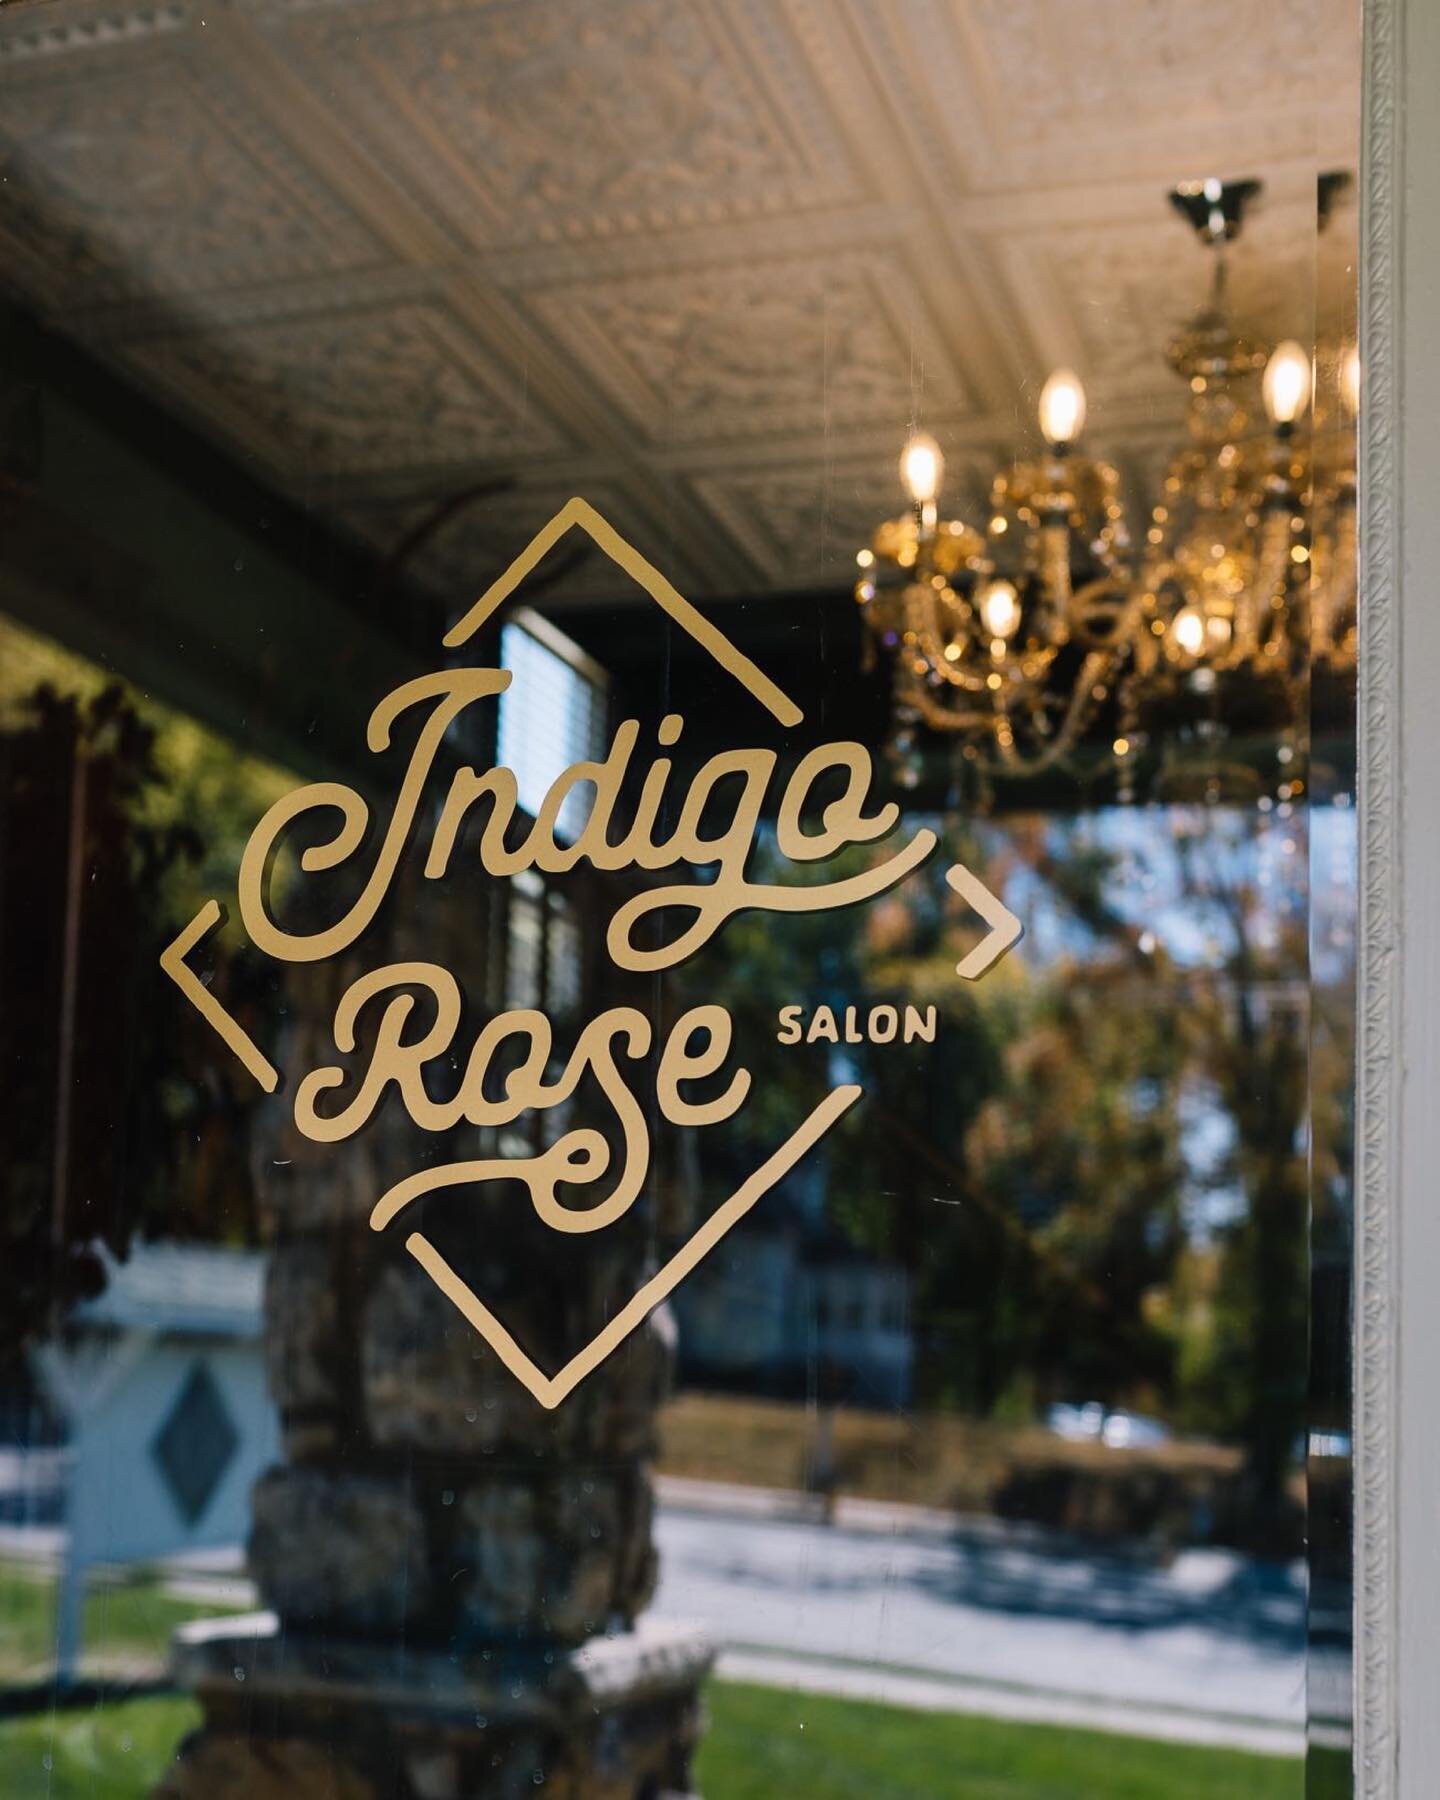 Indigo Rose Salon is the most deliciously bohemian, relaxing, fun &amp; welcoming space! Kellie @indigorosesalon_ is an expert stylist &amp; creative &mdash; working with her is so much fun!!

We&rsquo;ve been running their website and photographing 